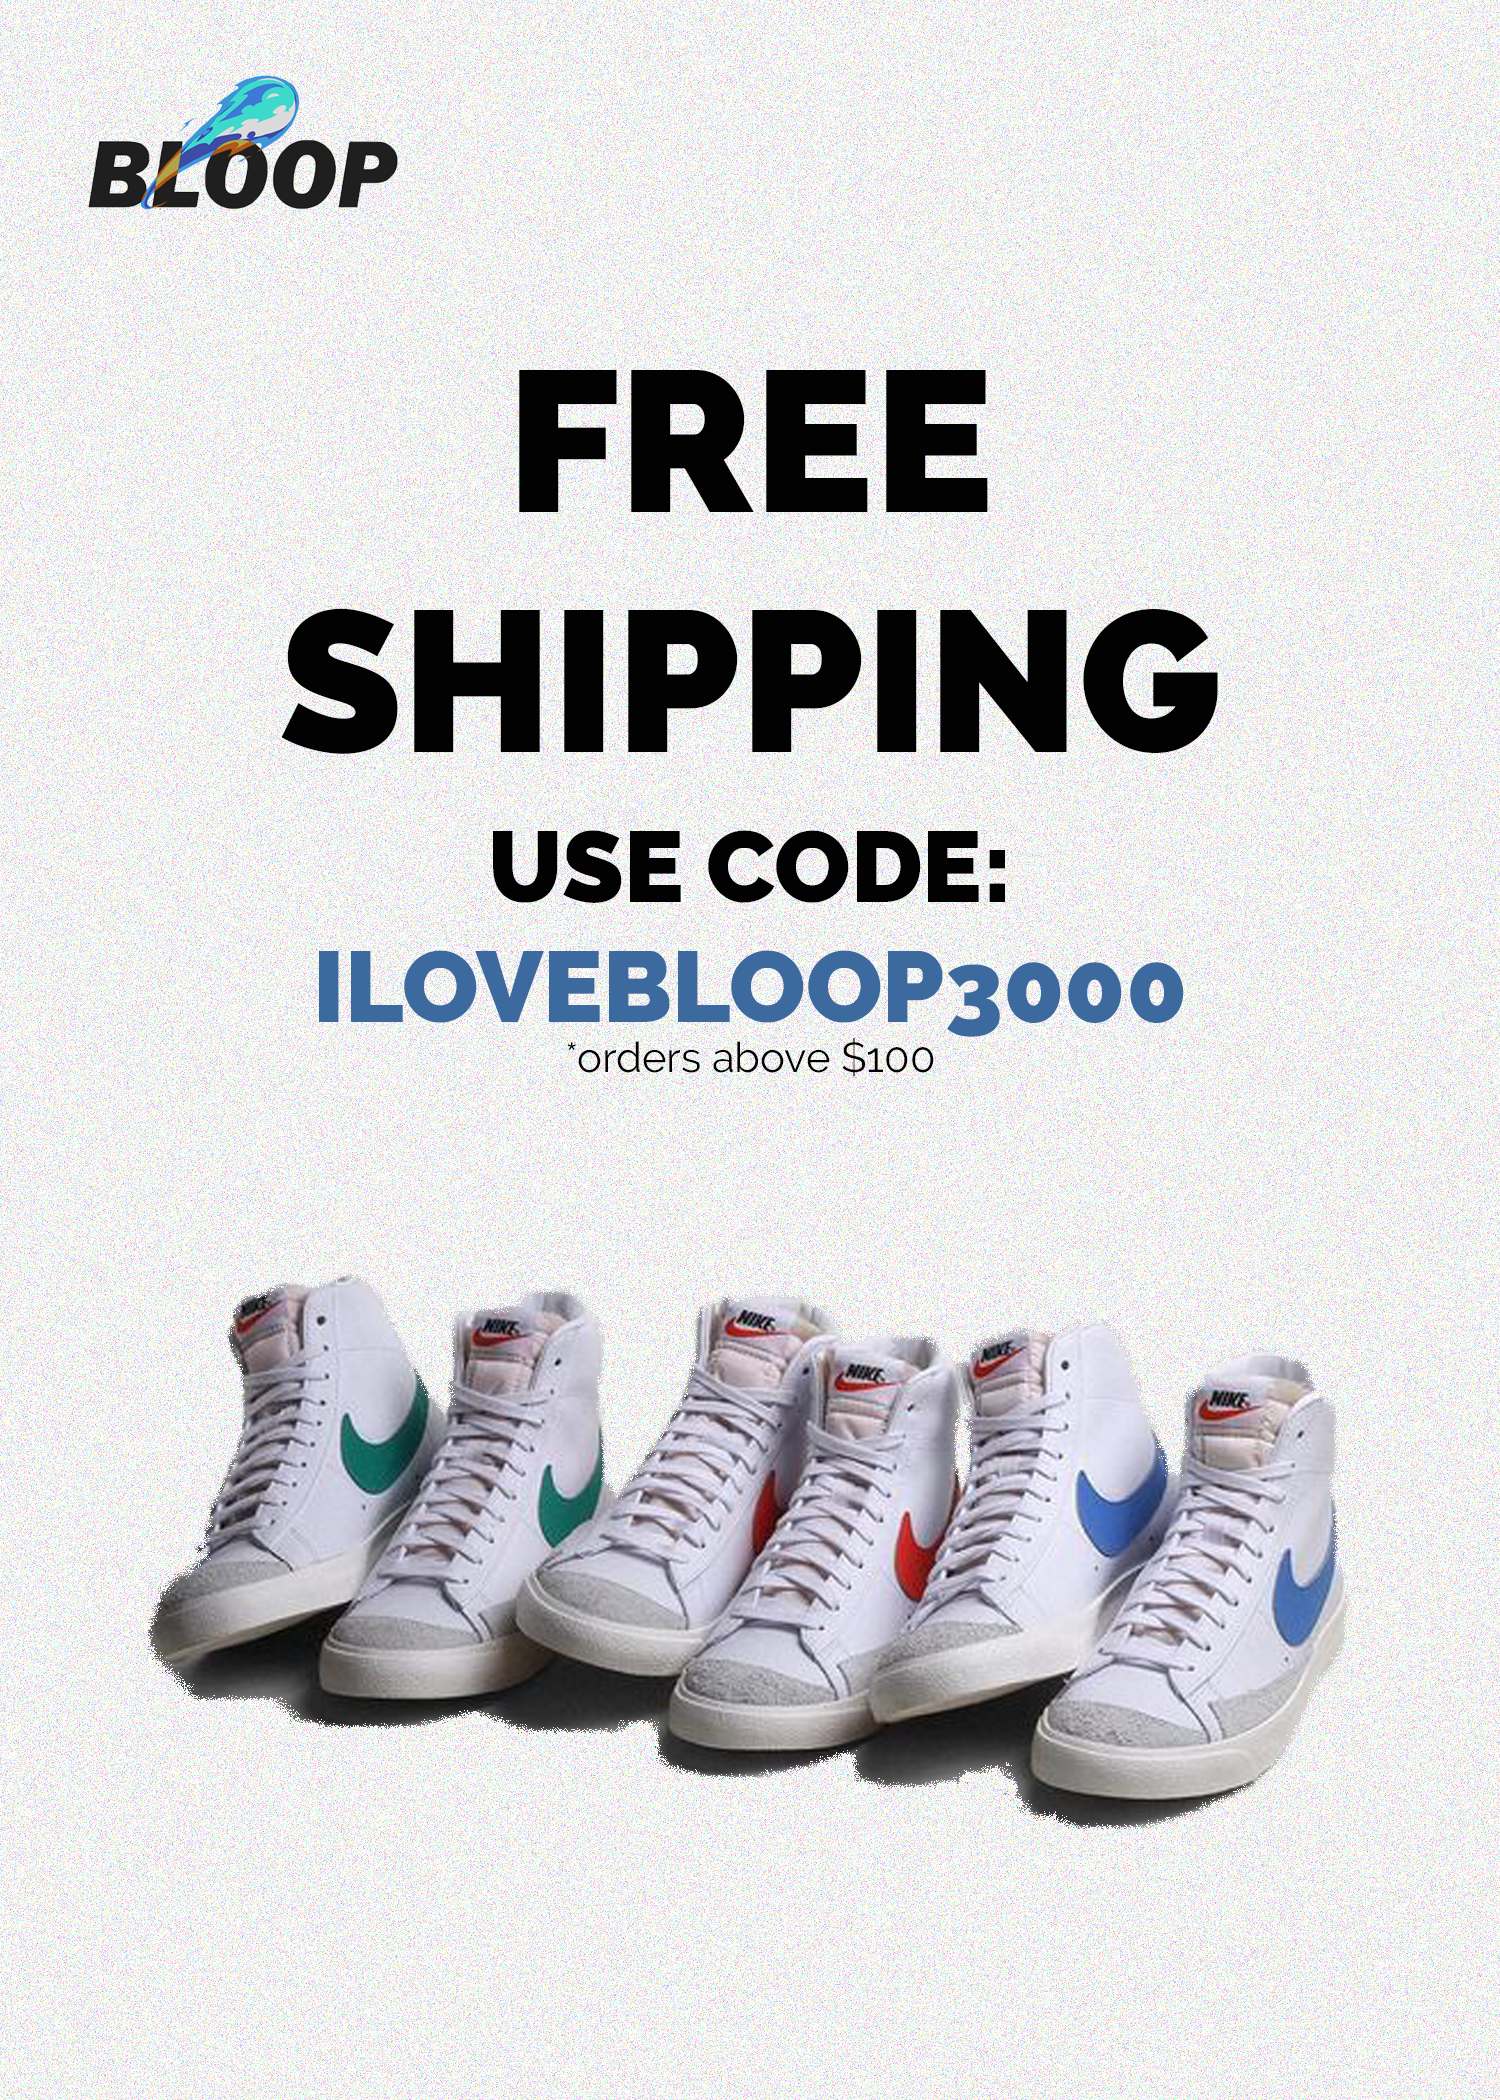 Promotion poster of free shipping and 